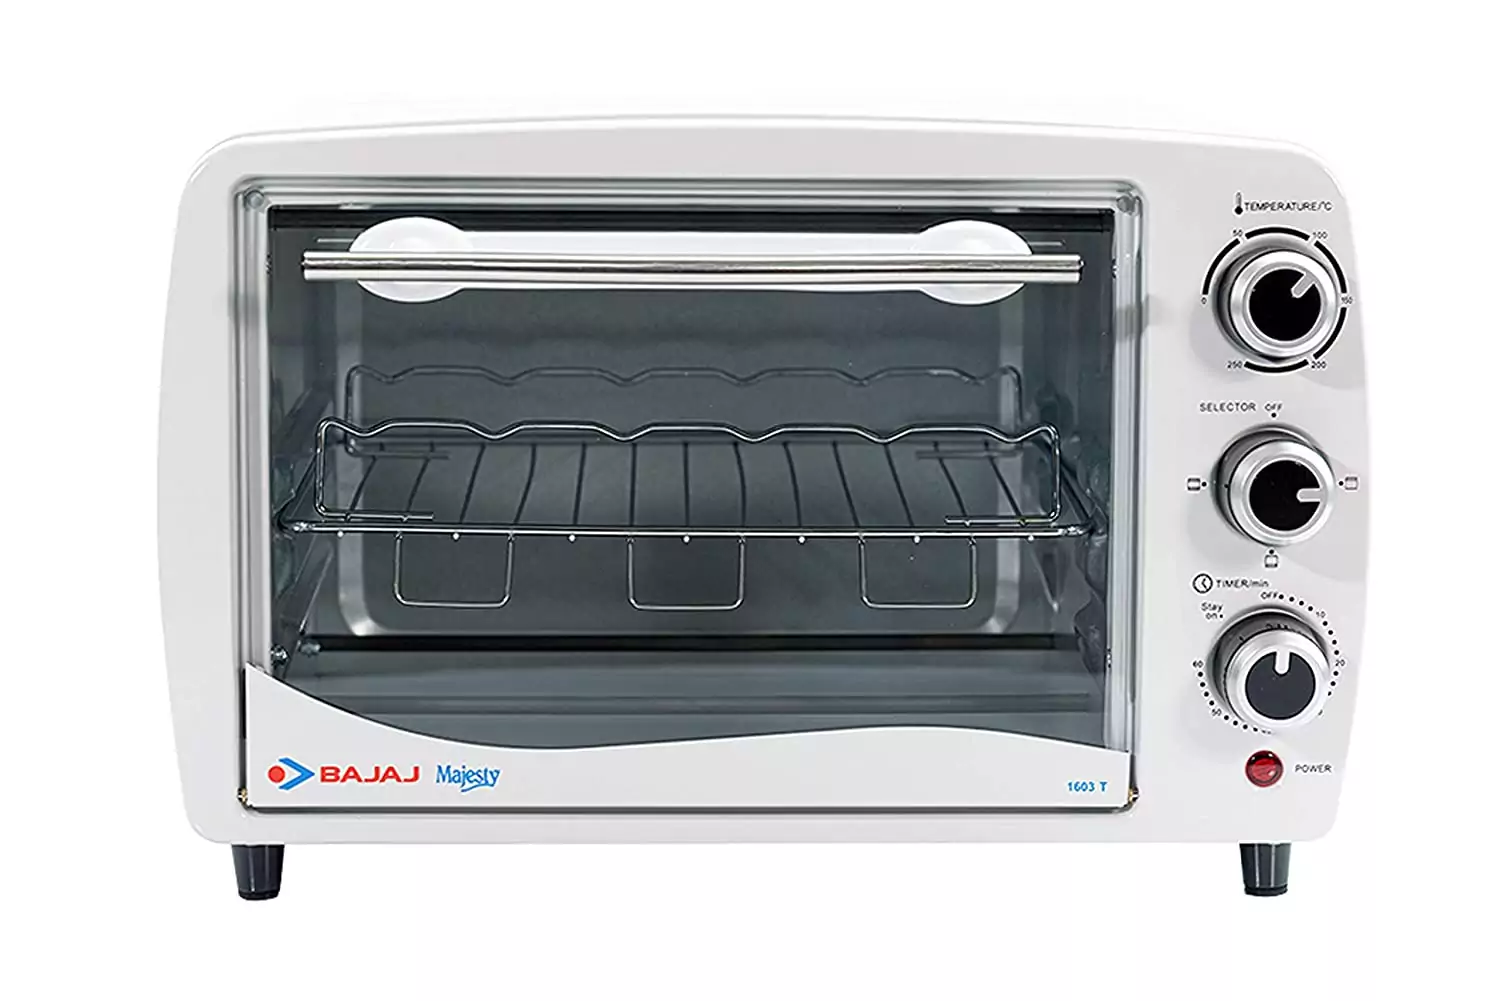 Best Oven Toaster Grill (OTG) To Buy In India